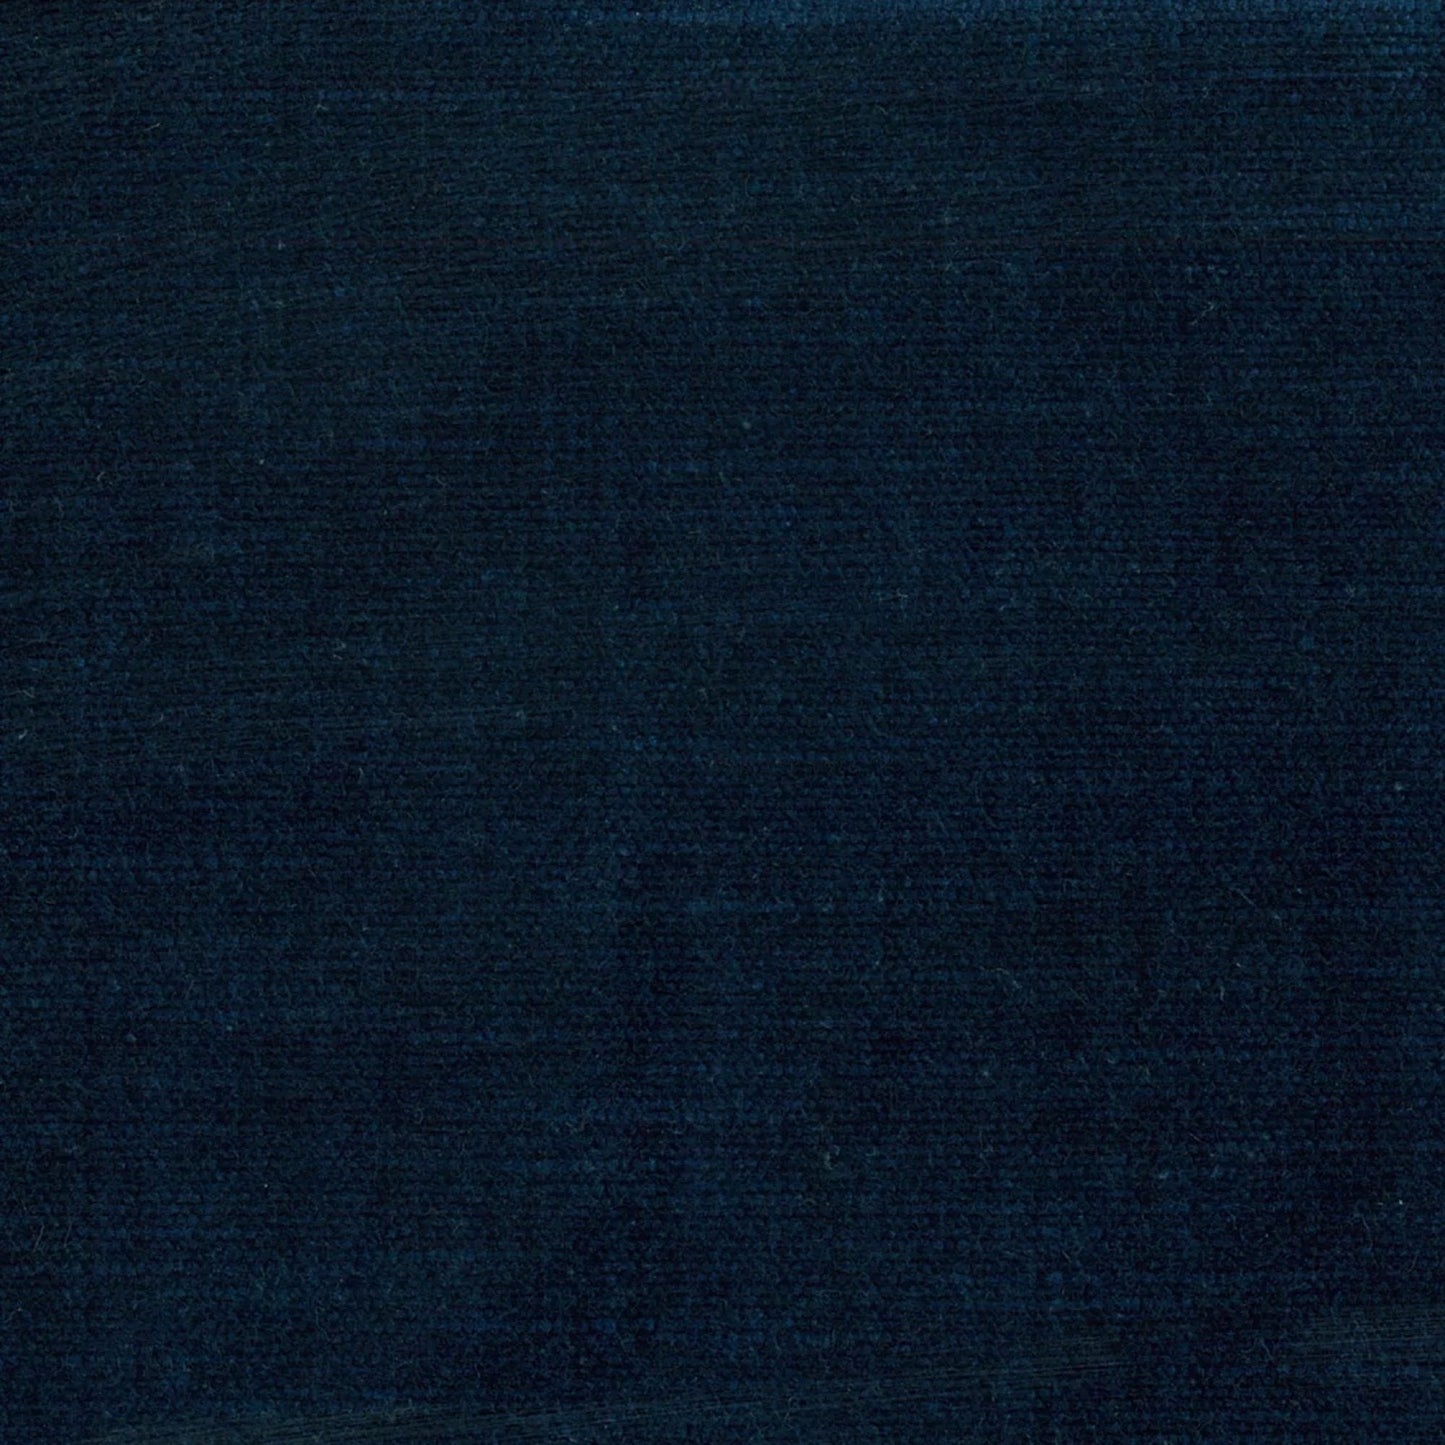 ORLEANS NAVY FABRIC SAMPLE | PREMIUM COLLECTION